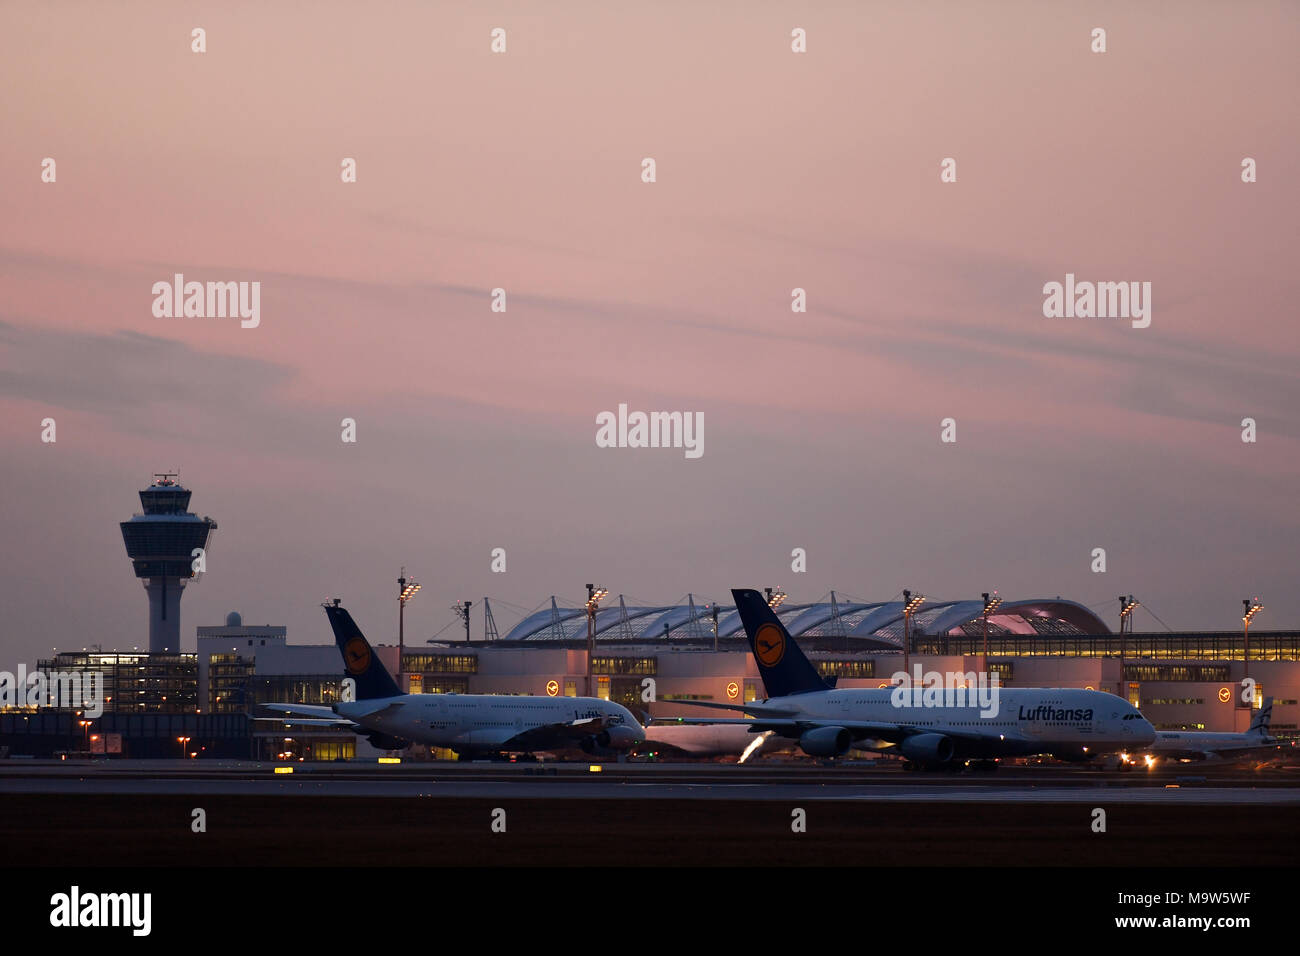 Lufthansa, Airbus A380-800, A380, 800, Airport, Munich, roll, in, out, start, take of, Terminal 1, Terminal 2, Tower, Satellit, Push Back Truck, MUC, Stock Photo